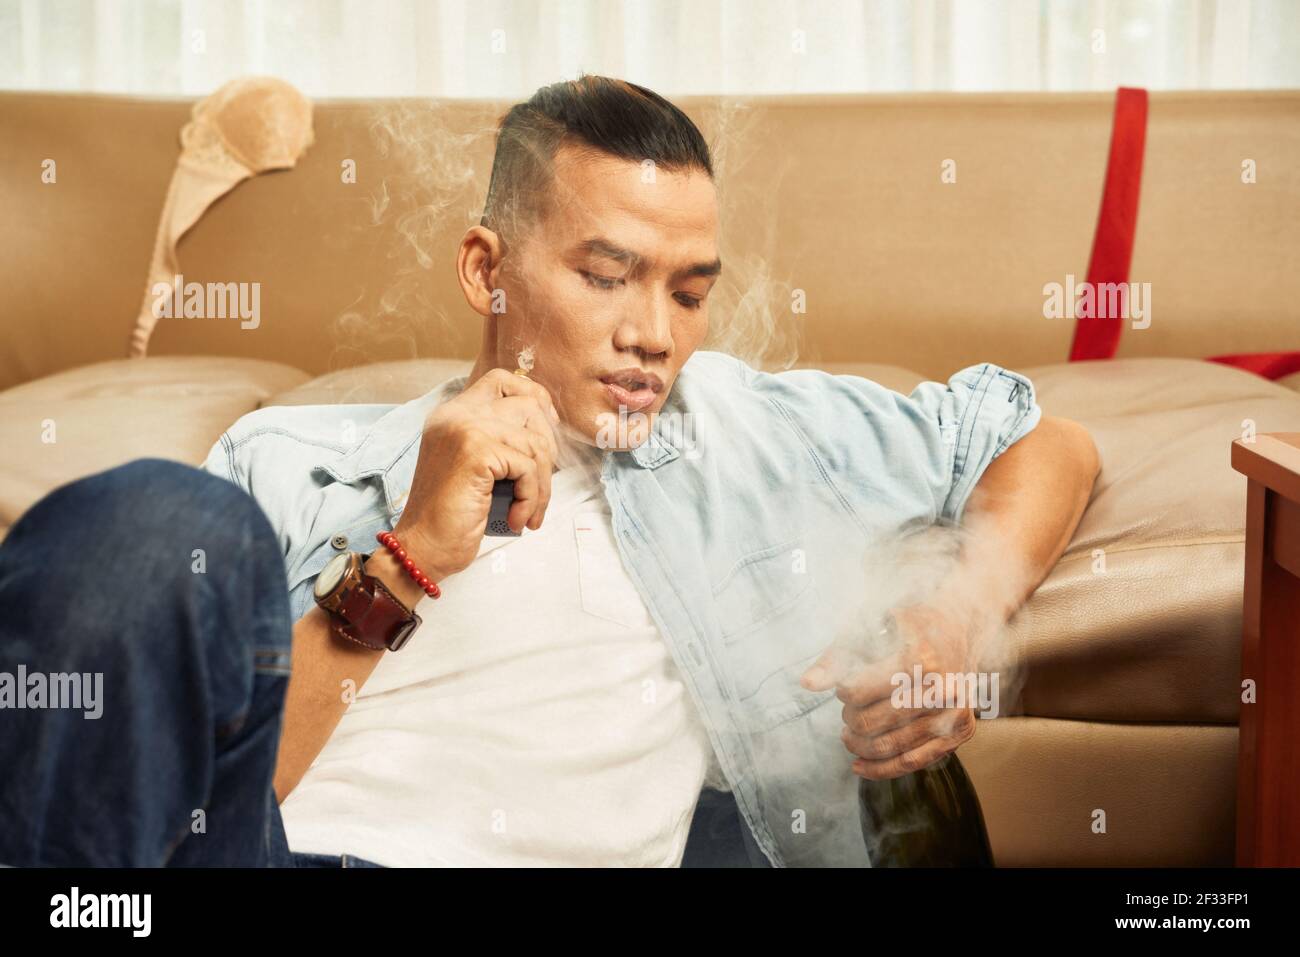 Handsome young Asian man smoking cigarette and drinking alcohol at home Stock Photo